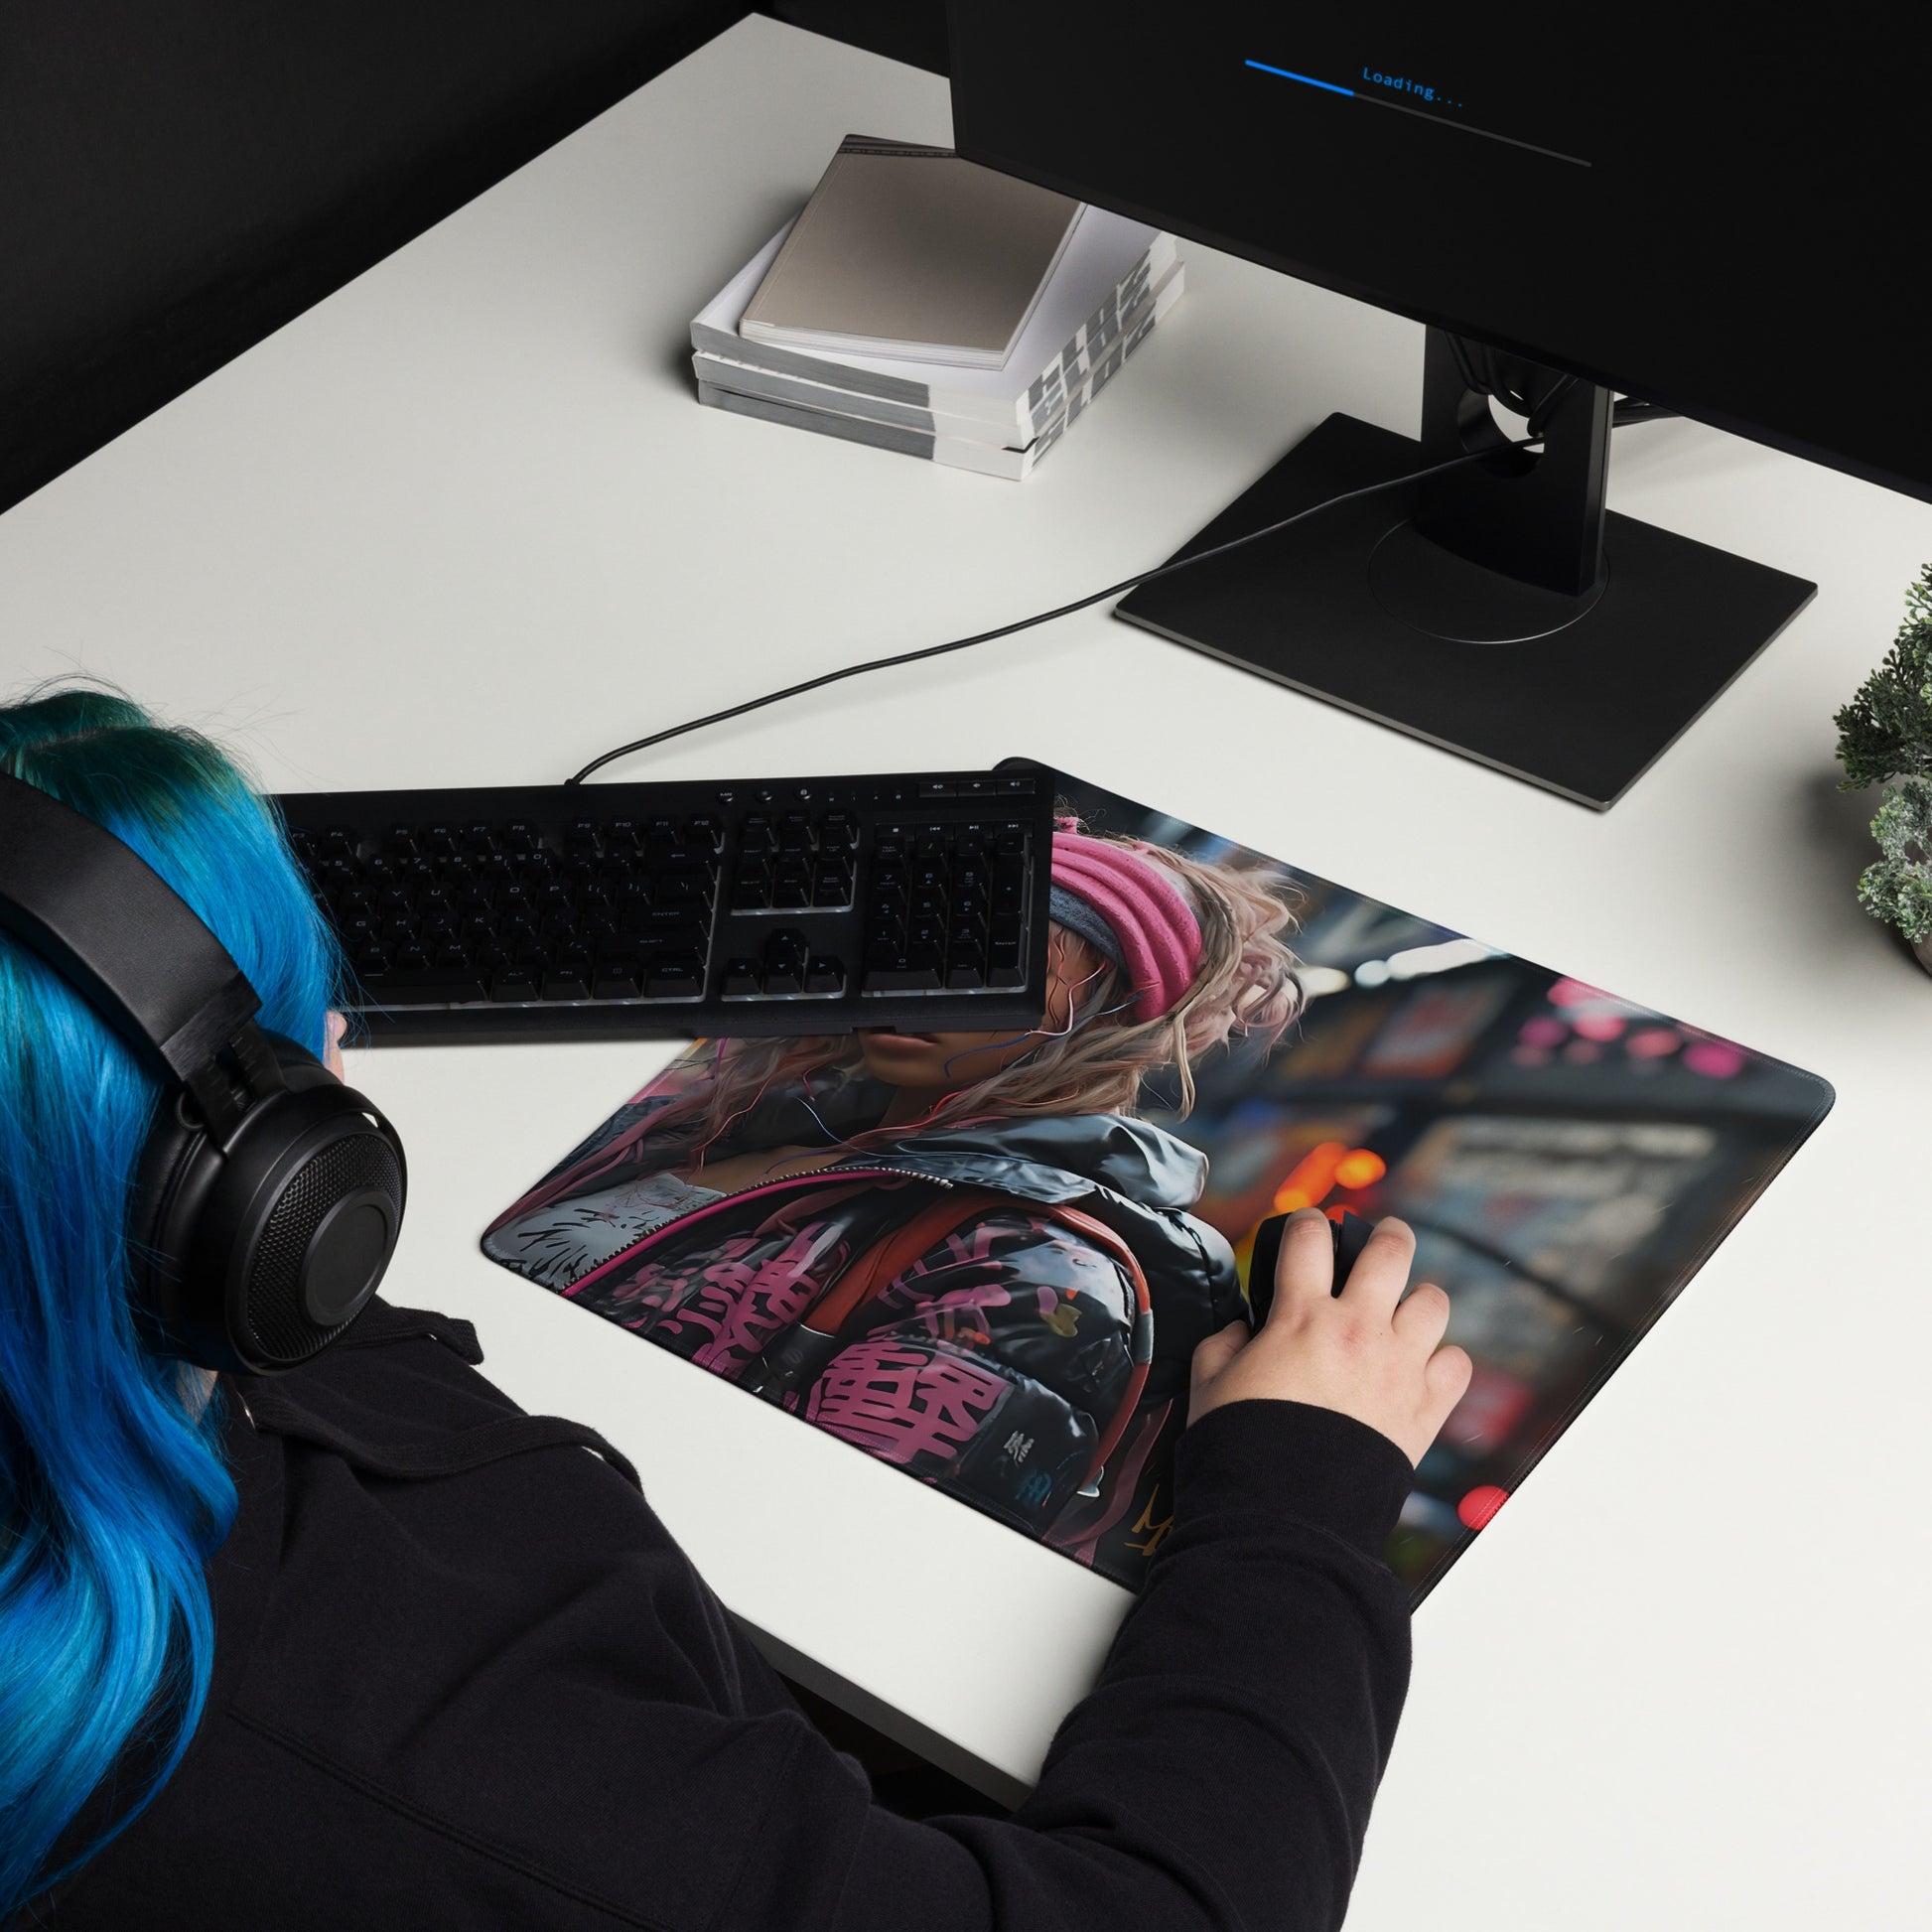 Dive into the details with a close-up of the "Future Girl" Gaming Mouse Pad in the second image. Witness the precision in every pixel of the design, as the mouse pad becomes a canvas for your gaming endeavors.